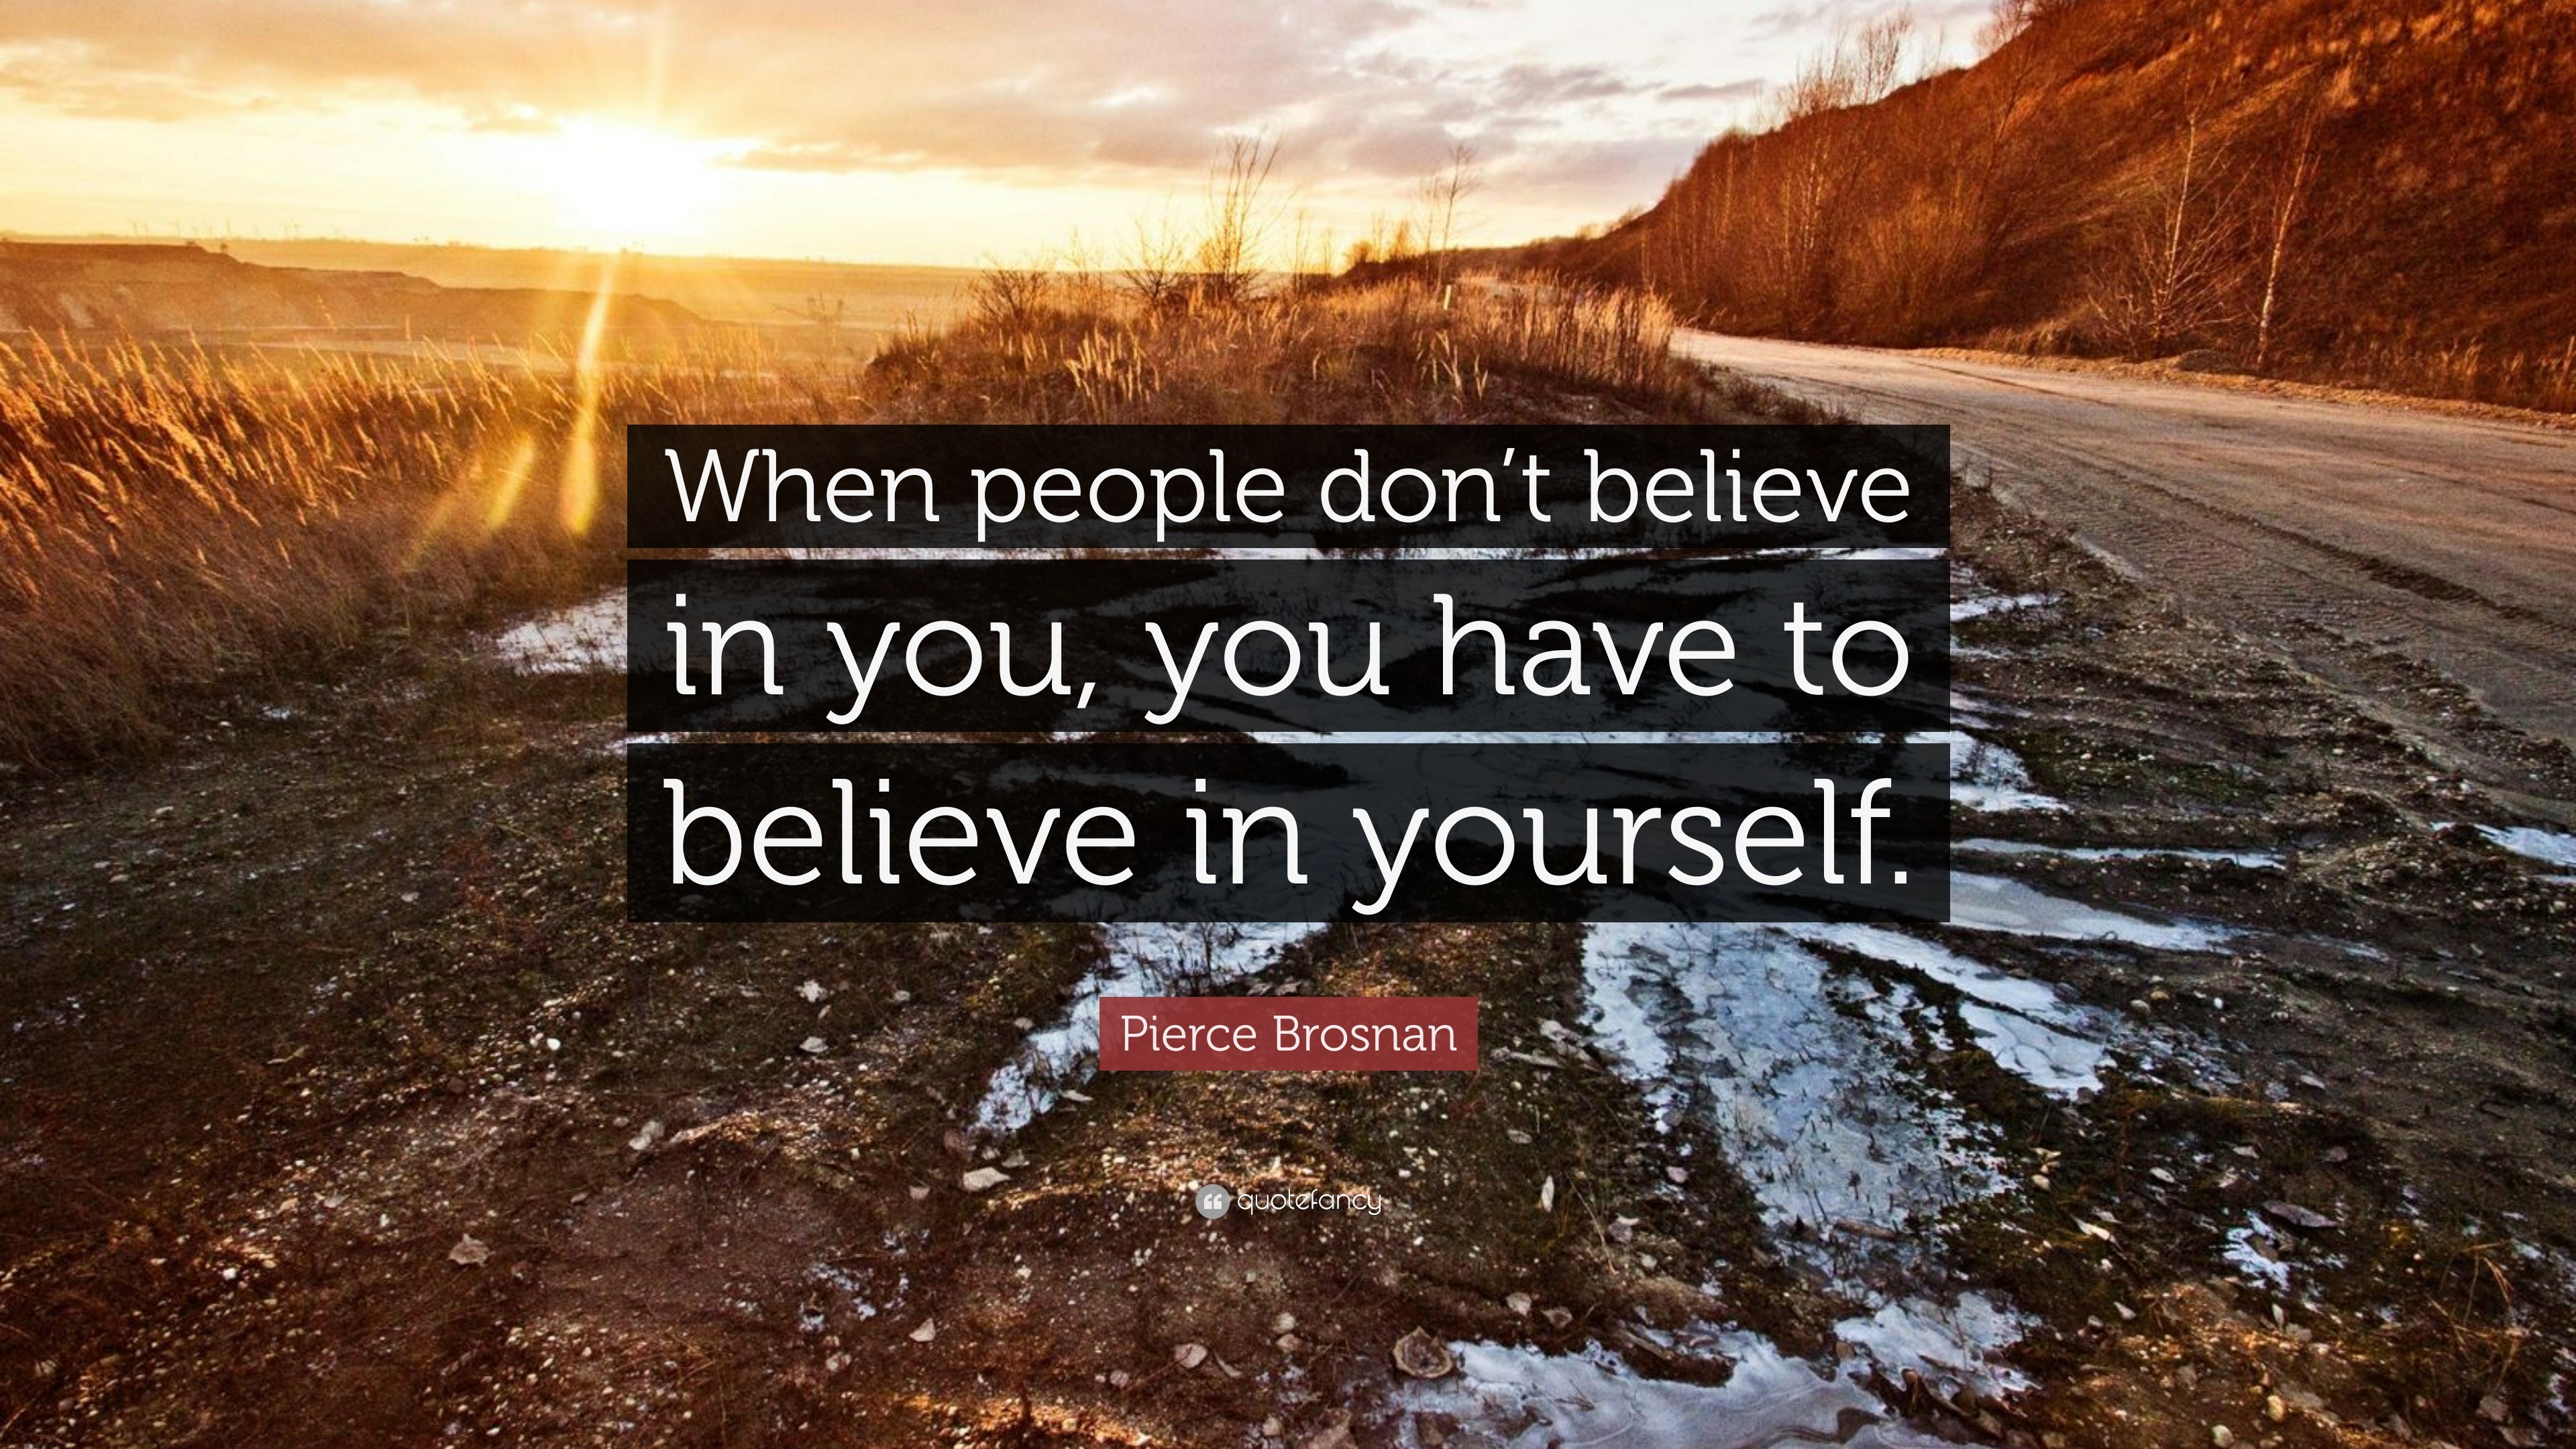 Pierce Brosnan Quote: “When people don’t believe in you, you have to ...